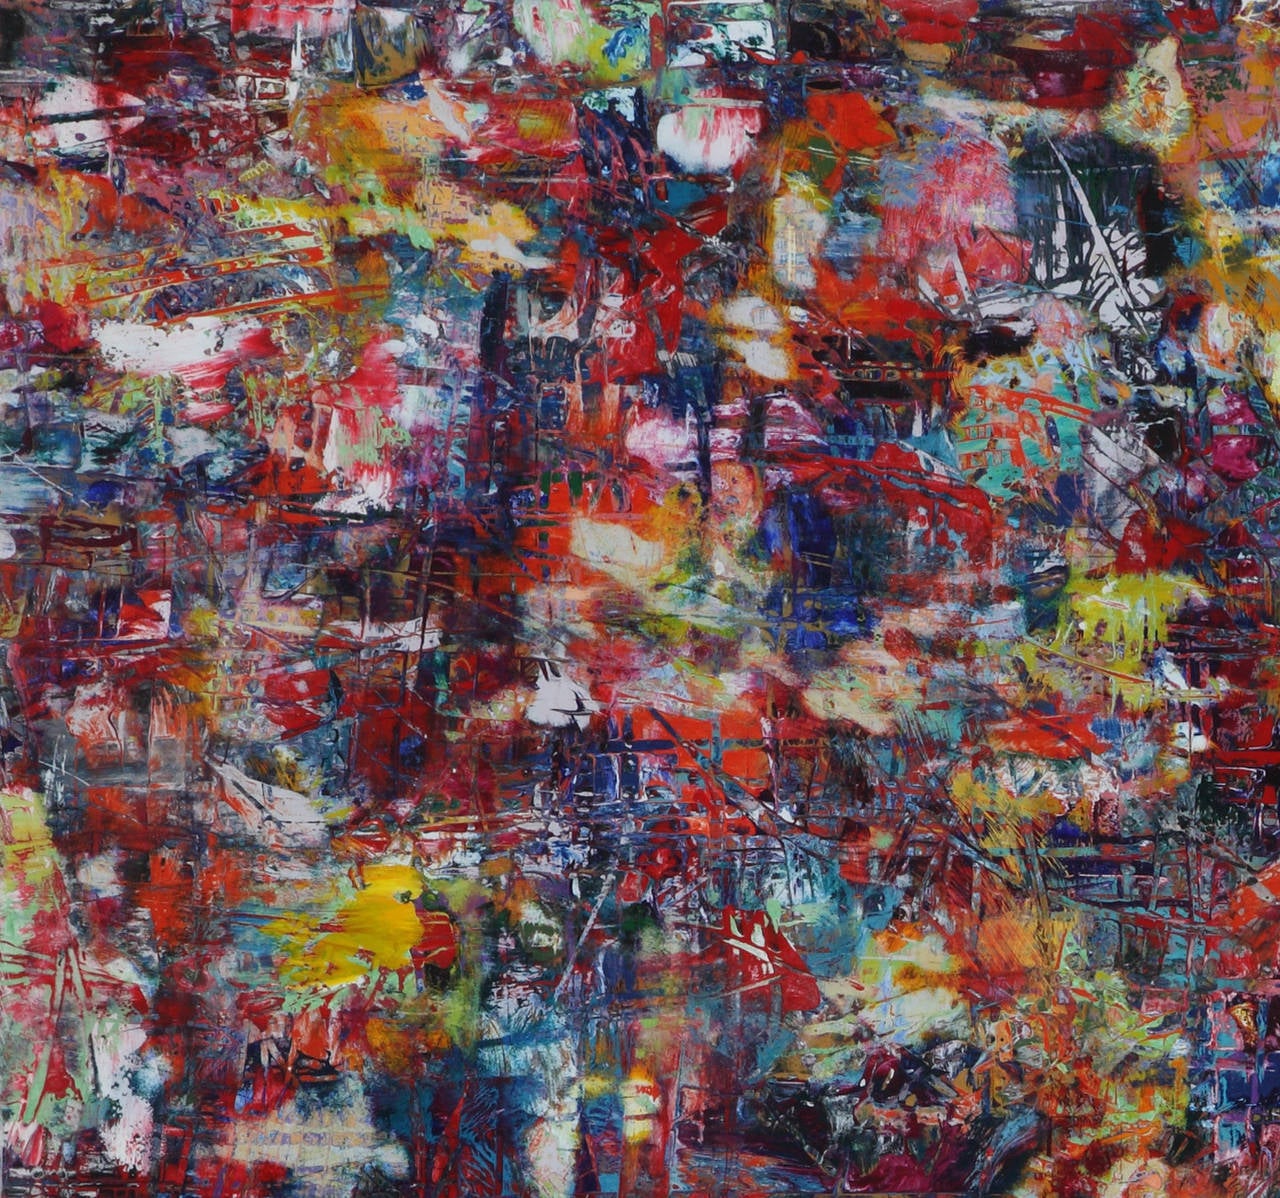 Untitled #252012, 2012 - Contemporary Painting by Lainard Bush